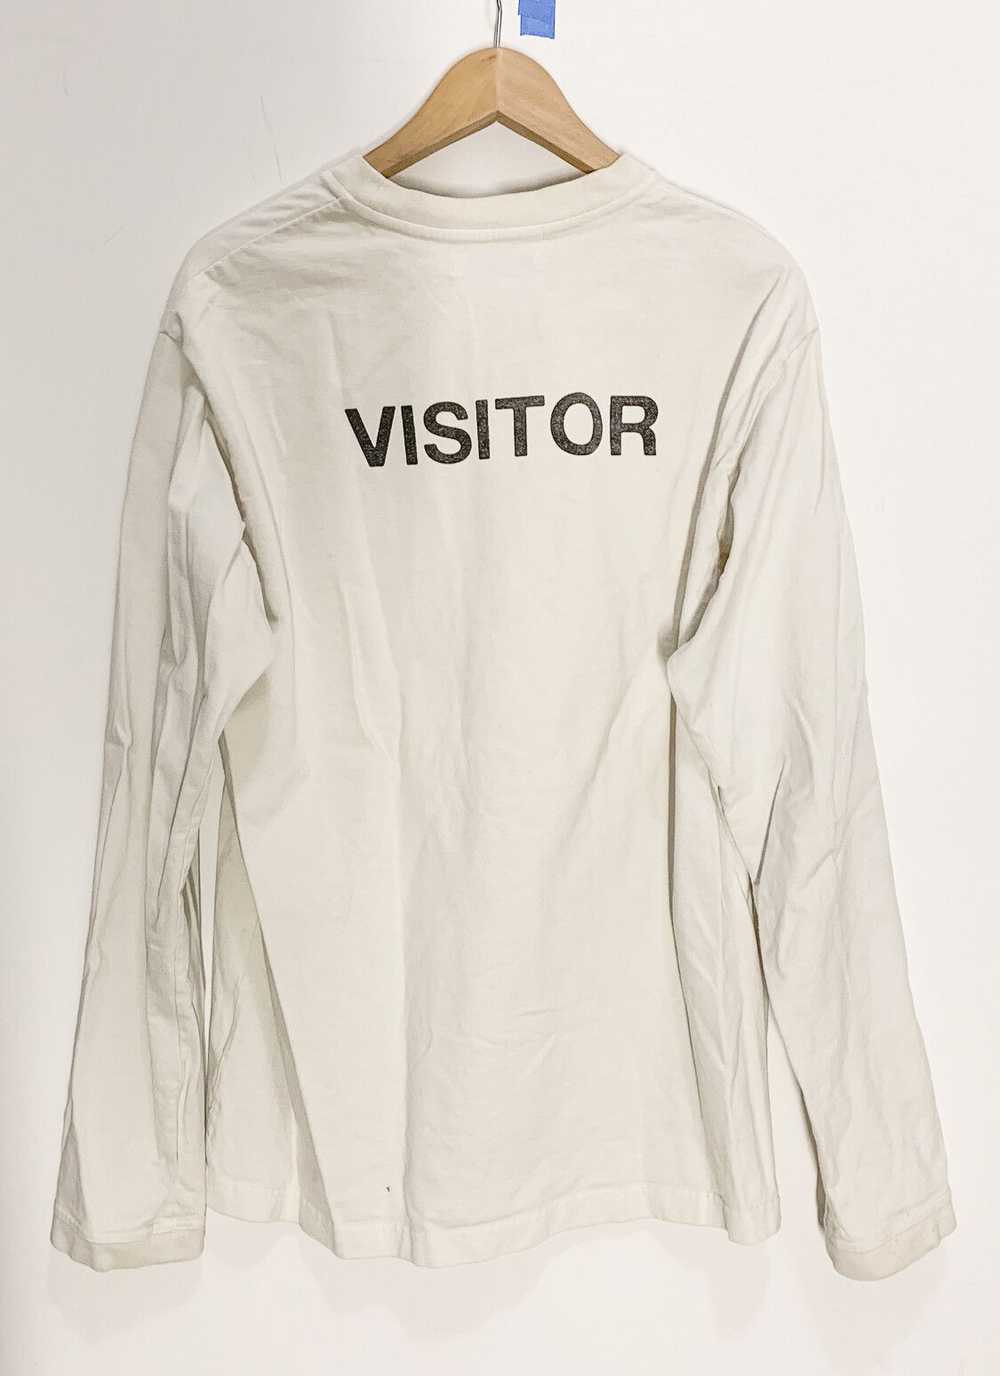 Ambush Design Waves In Space Visitor Tee - image 2